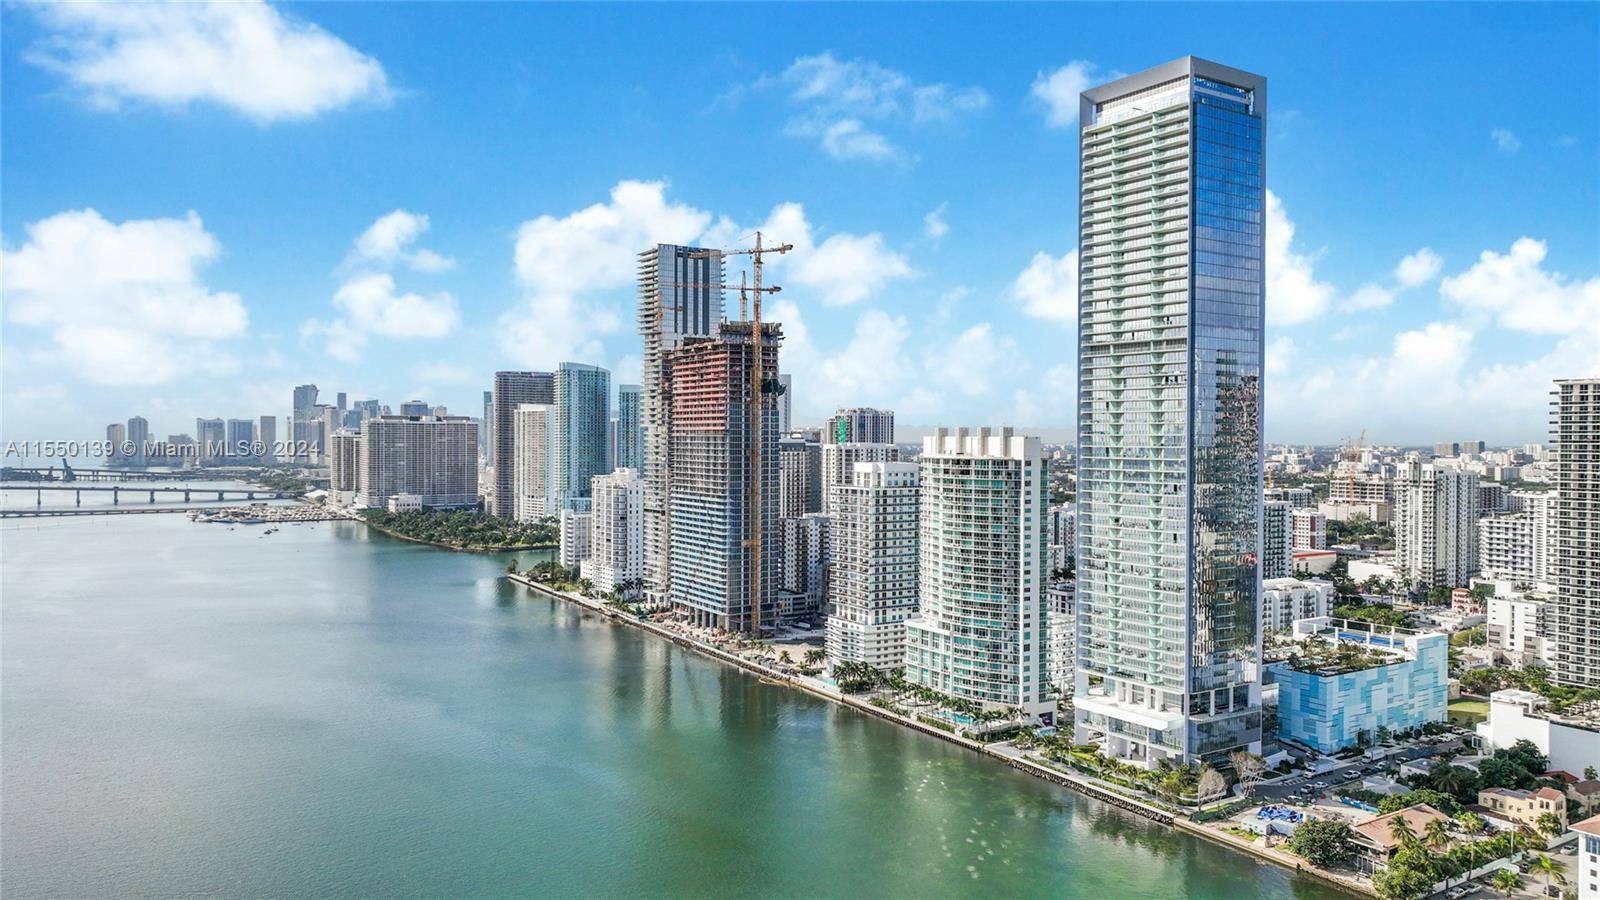 Discover the pinnacle of waterfront living in the vibrant Edgewater neighborhood of Miami at Missoni Baia.